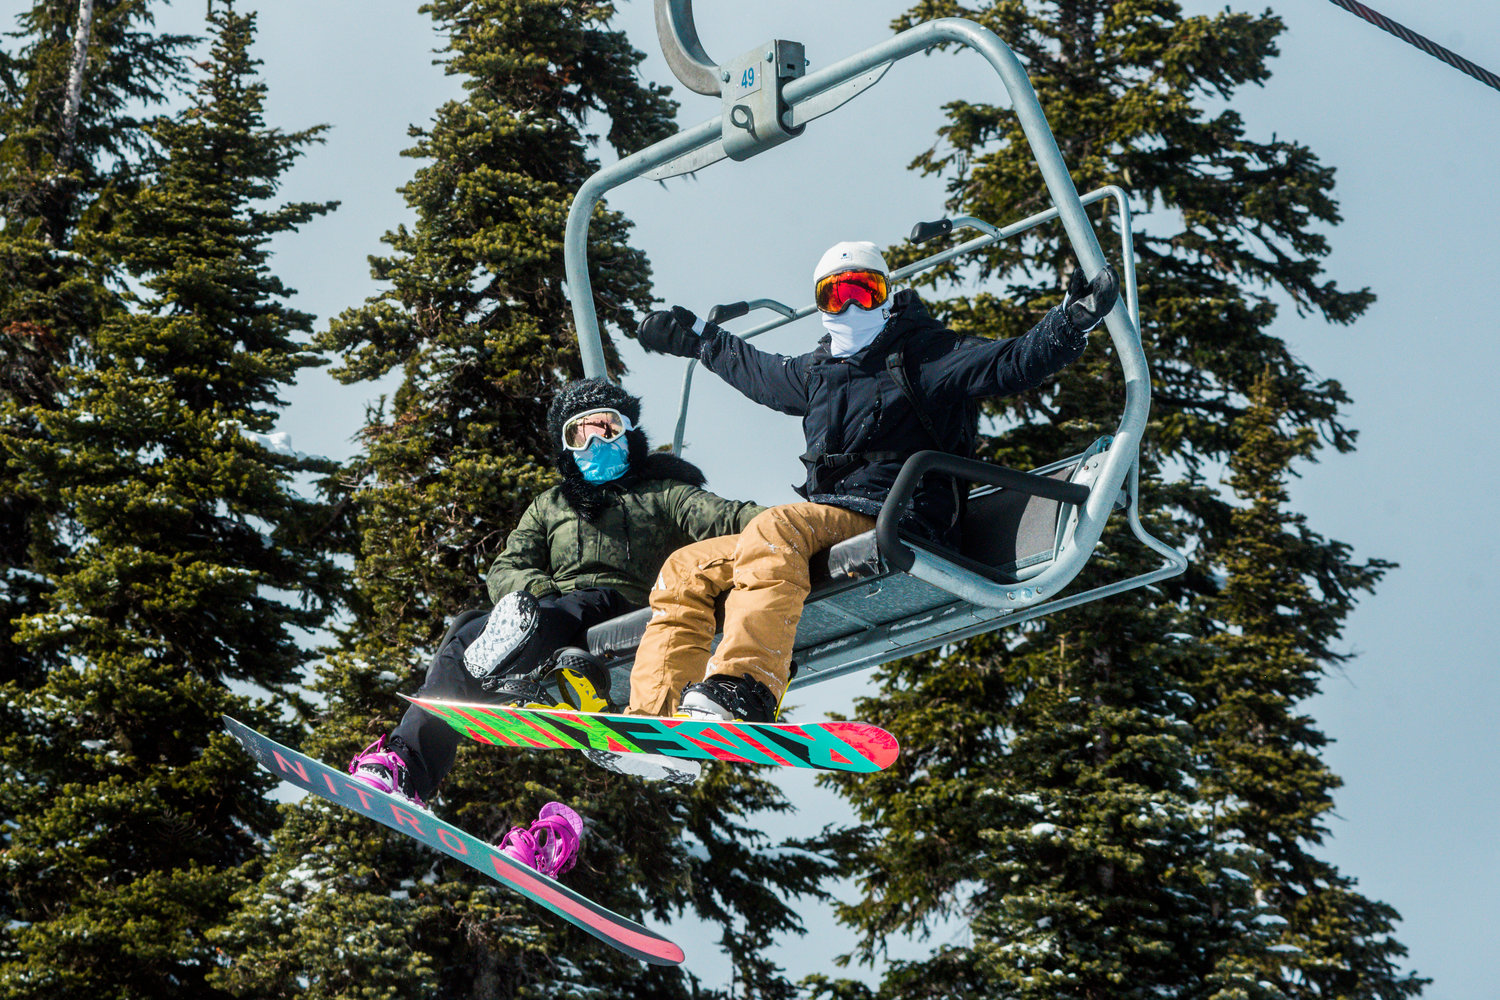 Snowboarders celebrate a birthday by visiting the White Pass Ski Area on Sunday.